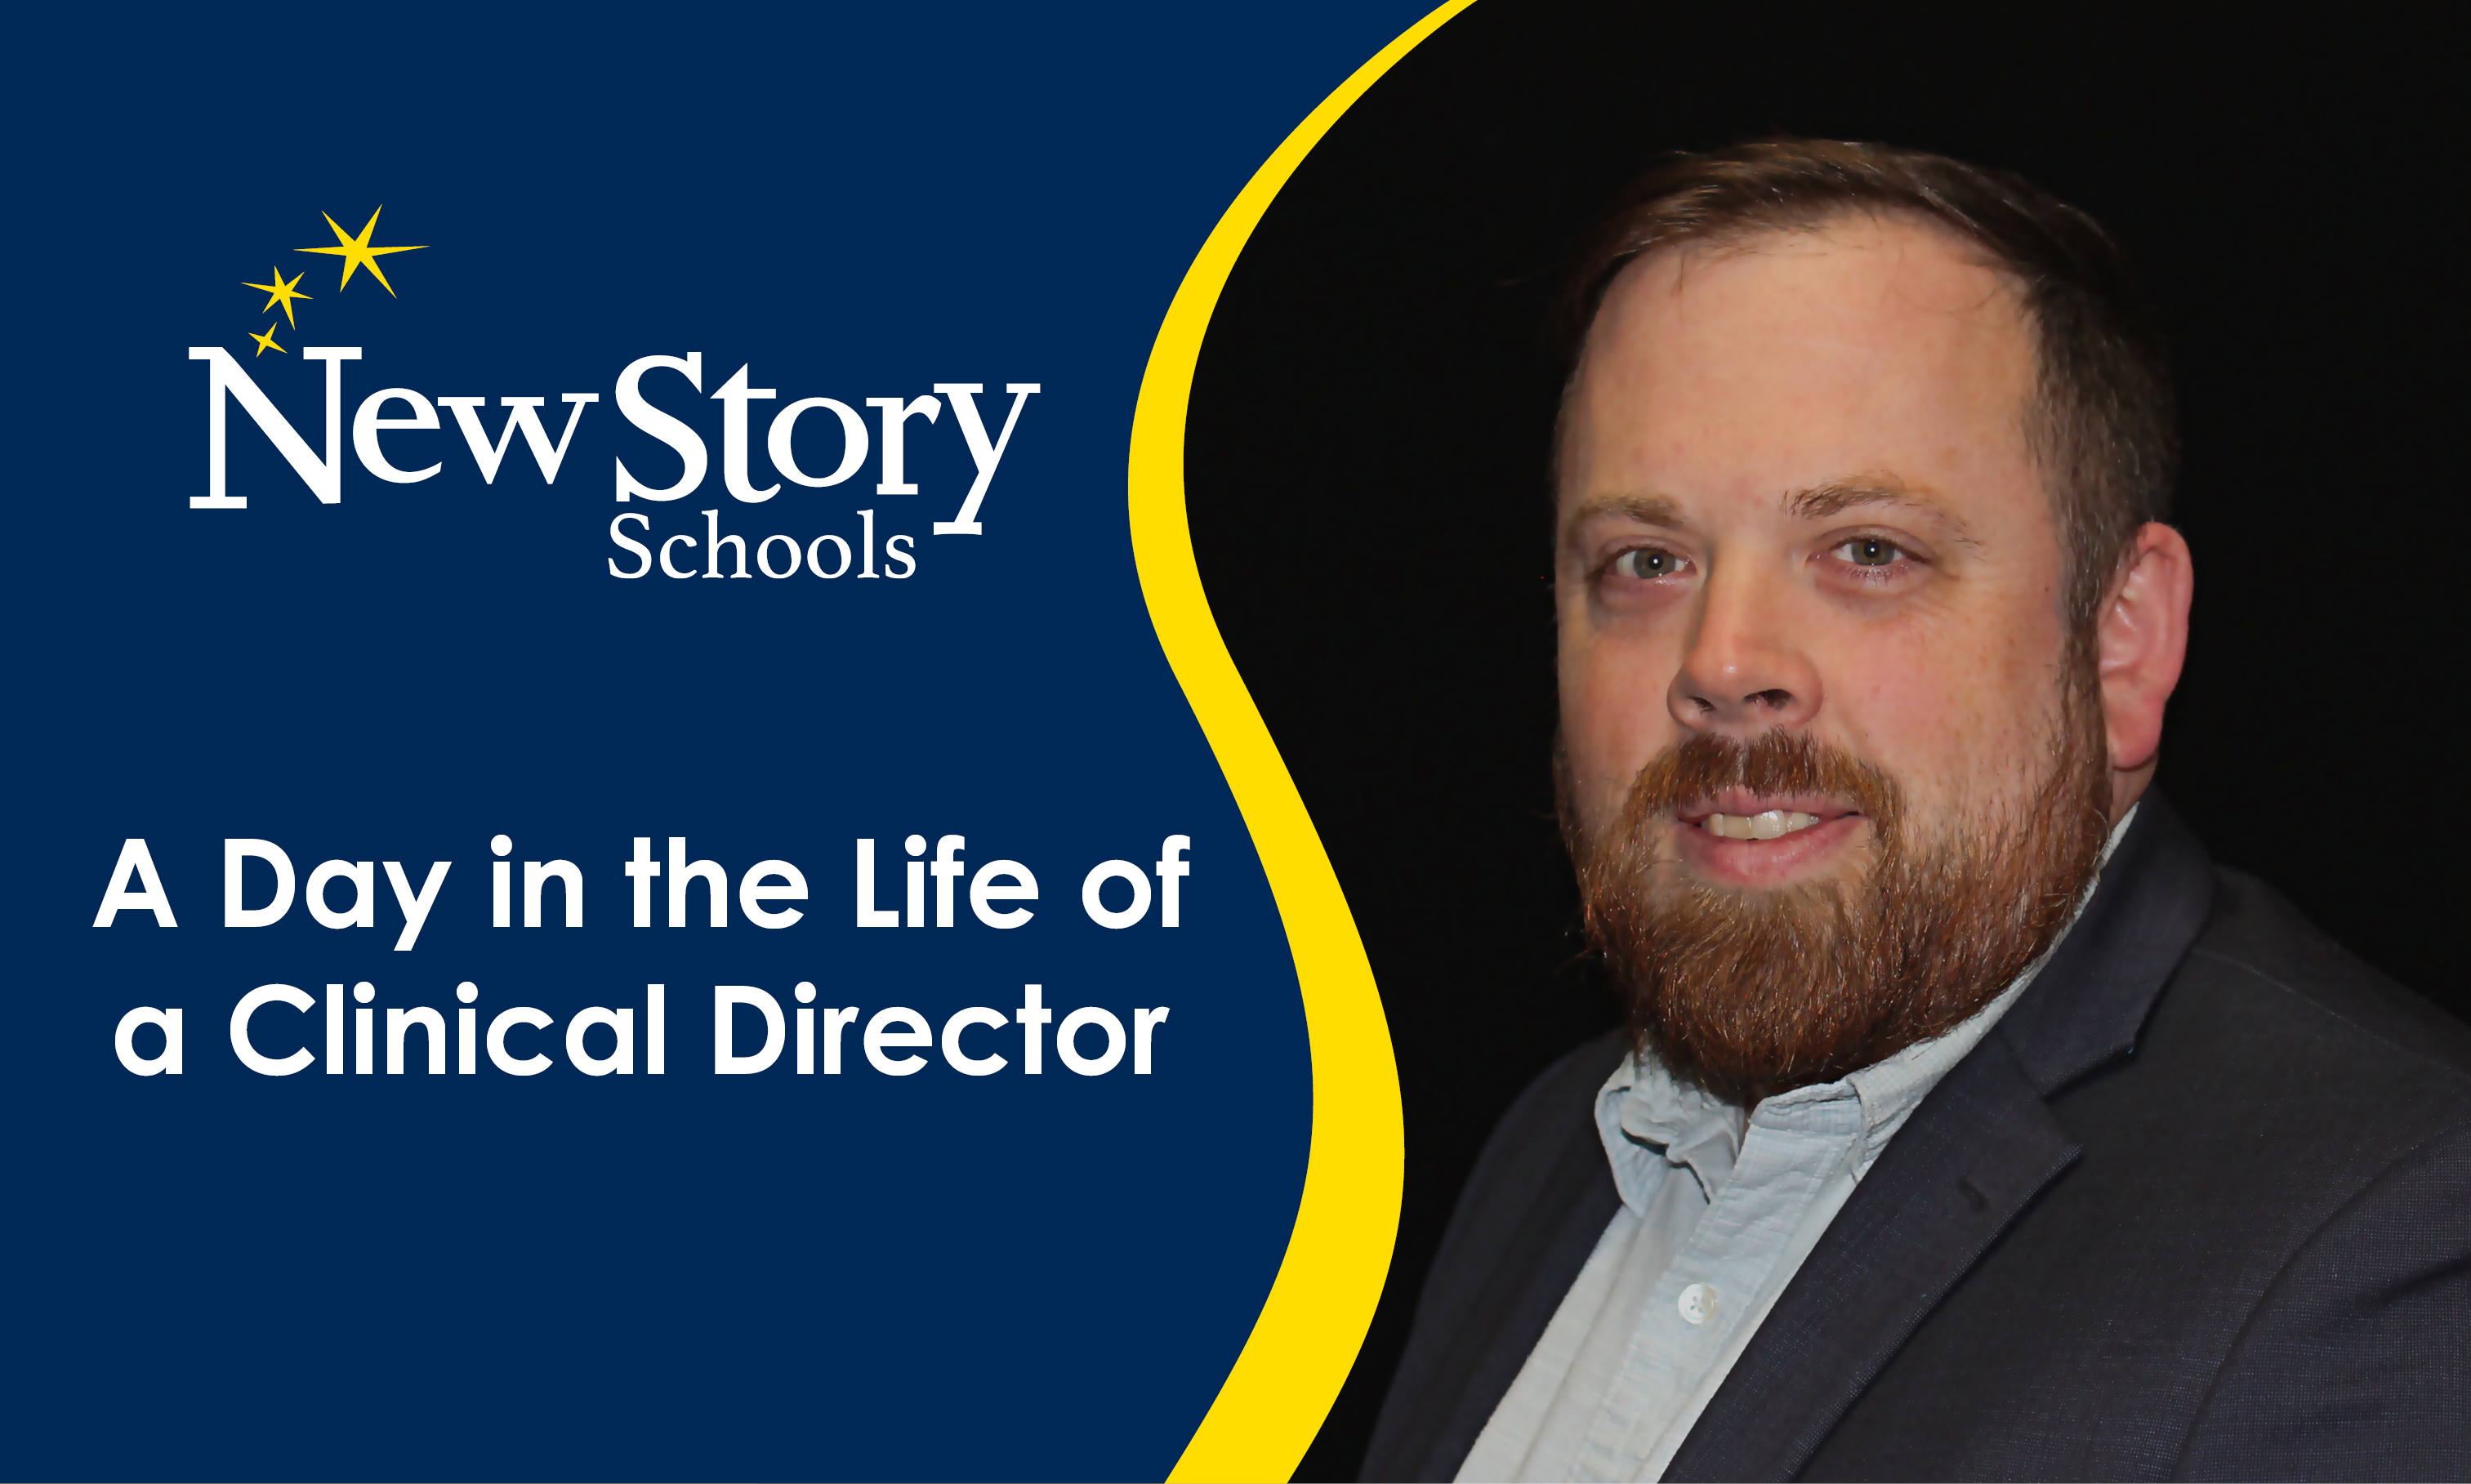 A Day in the Life of a Clinical Director